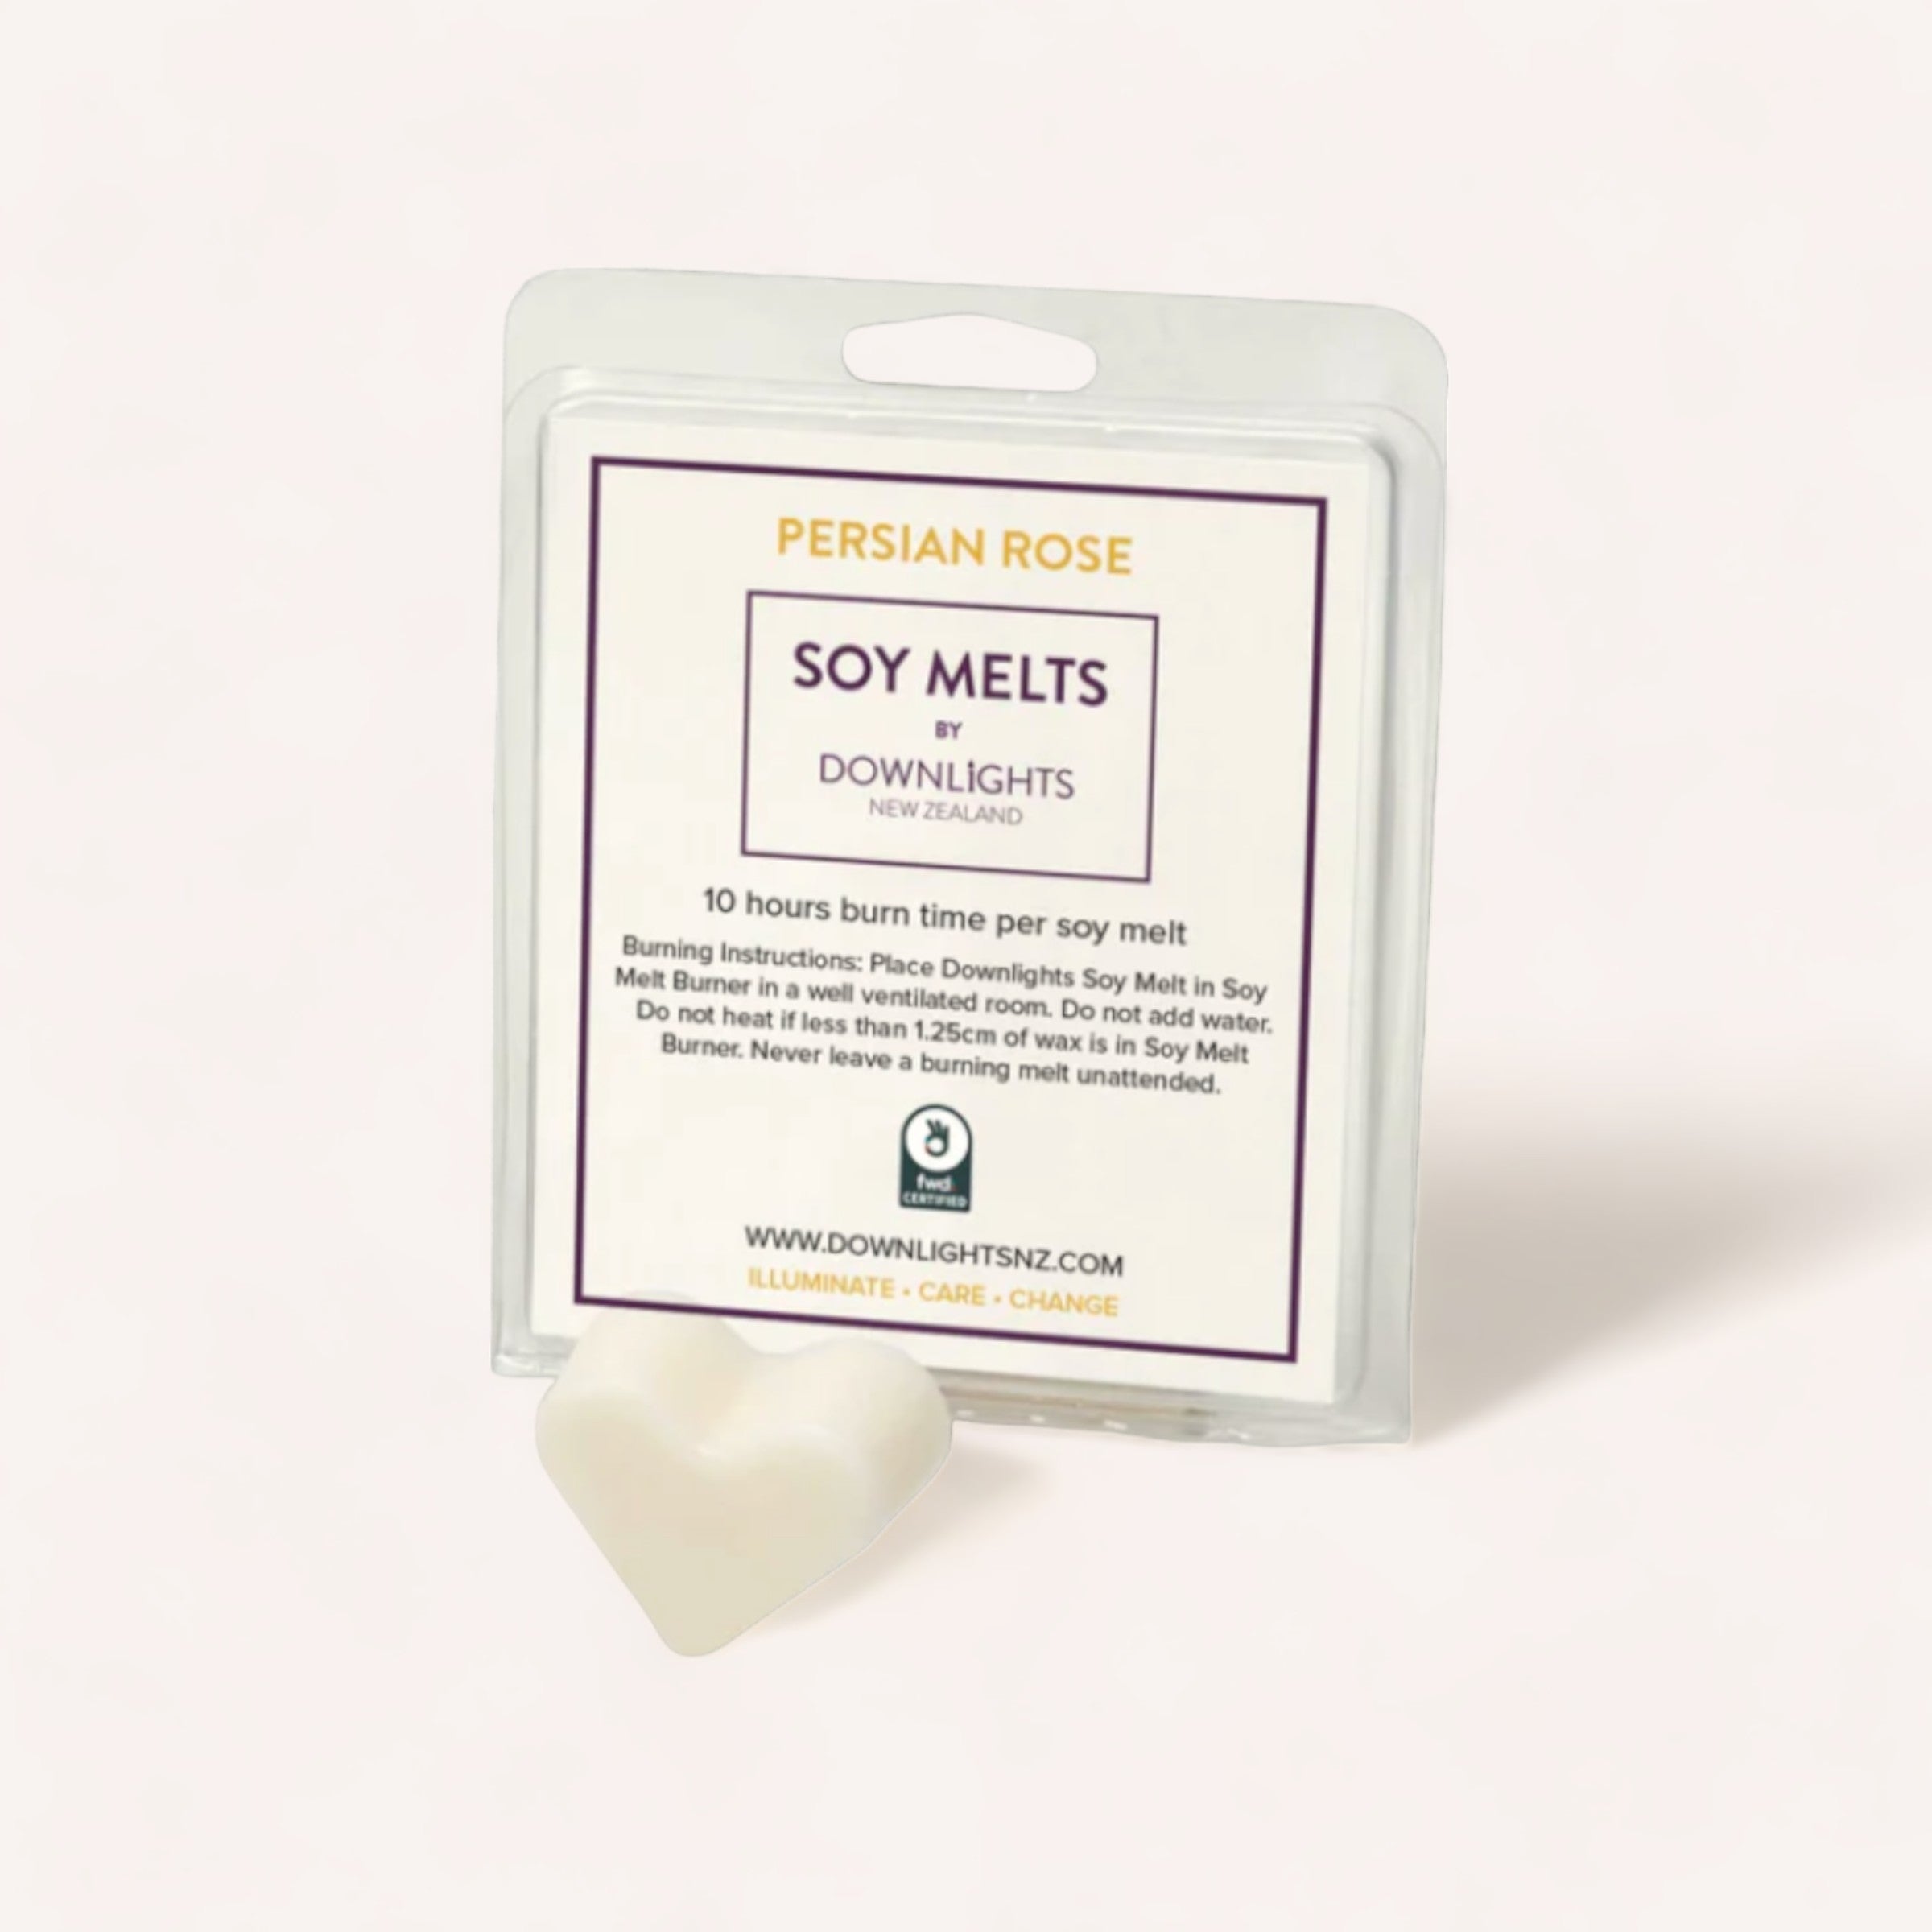 persian rose heart shaped soy melts by downlights nz